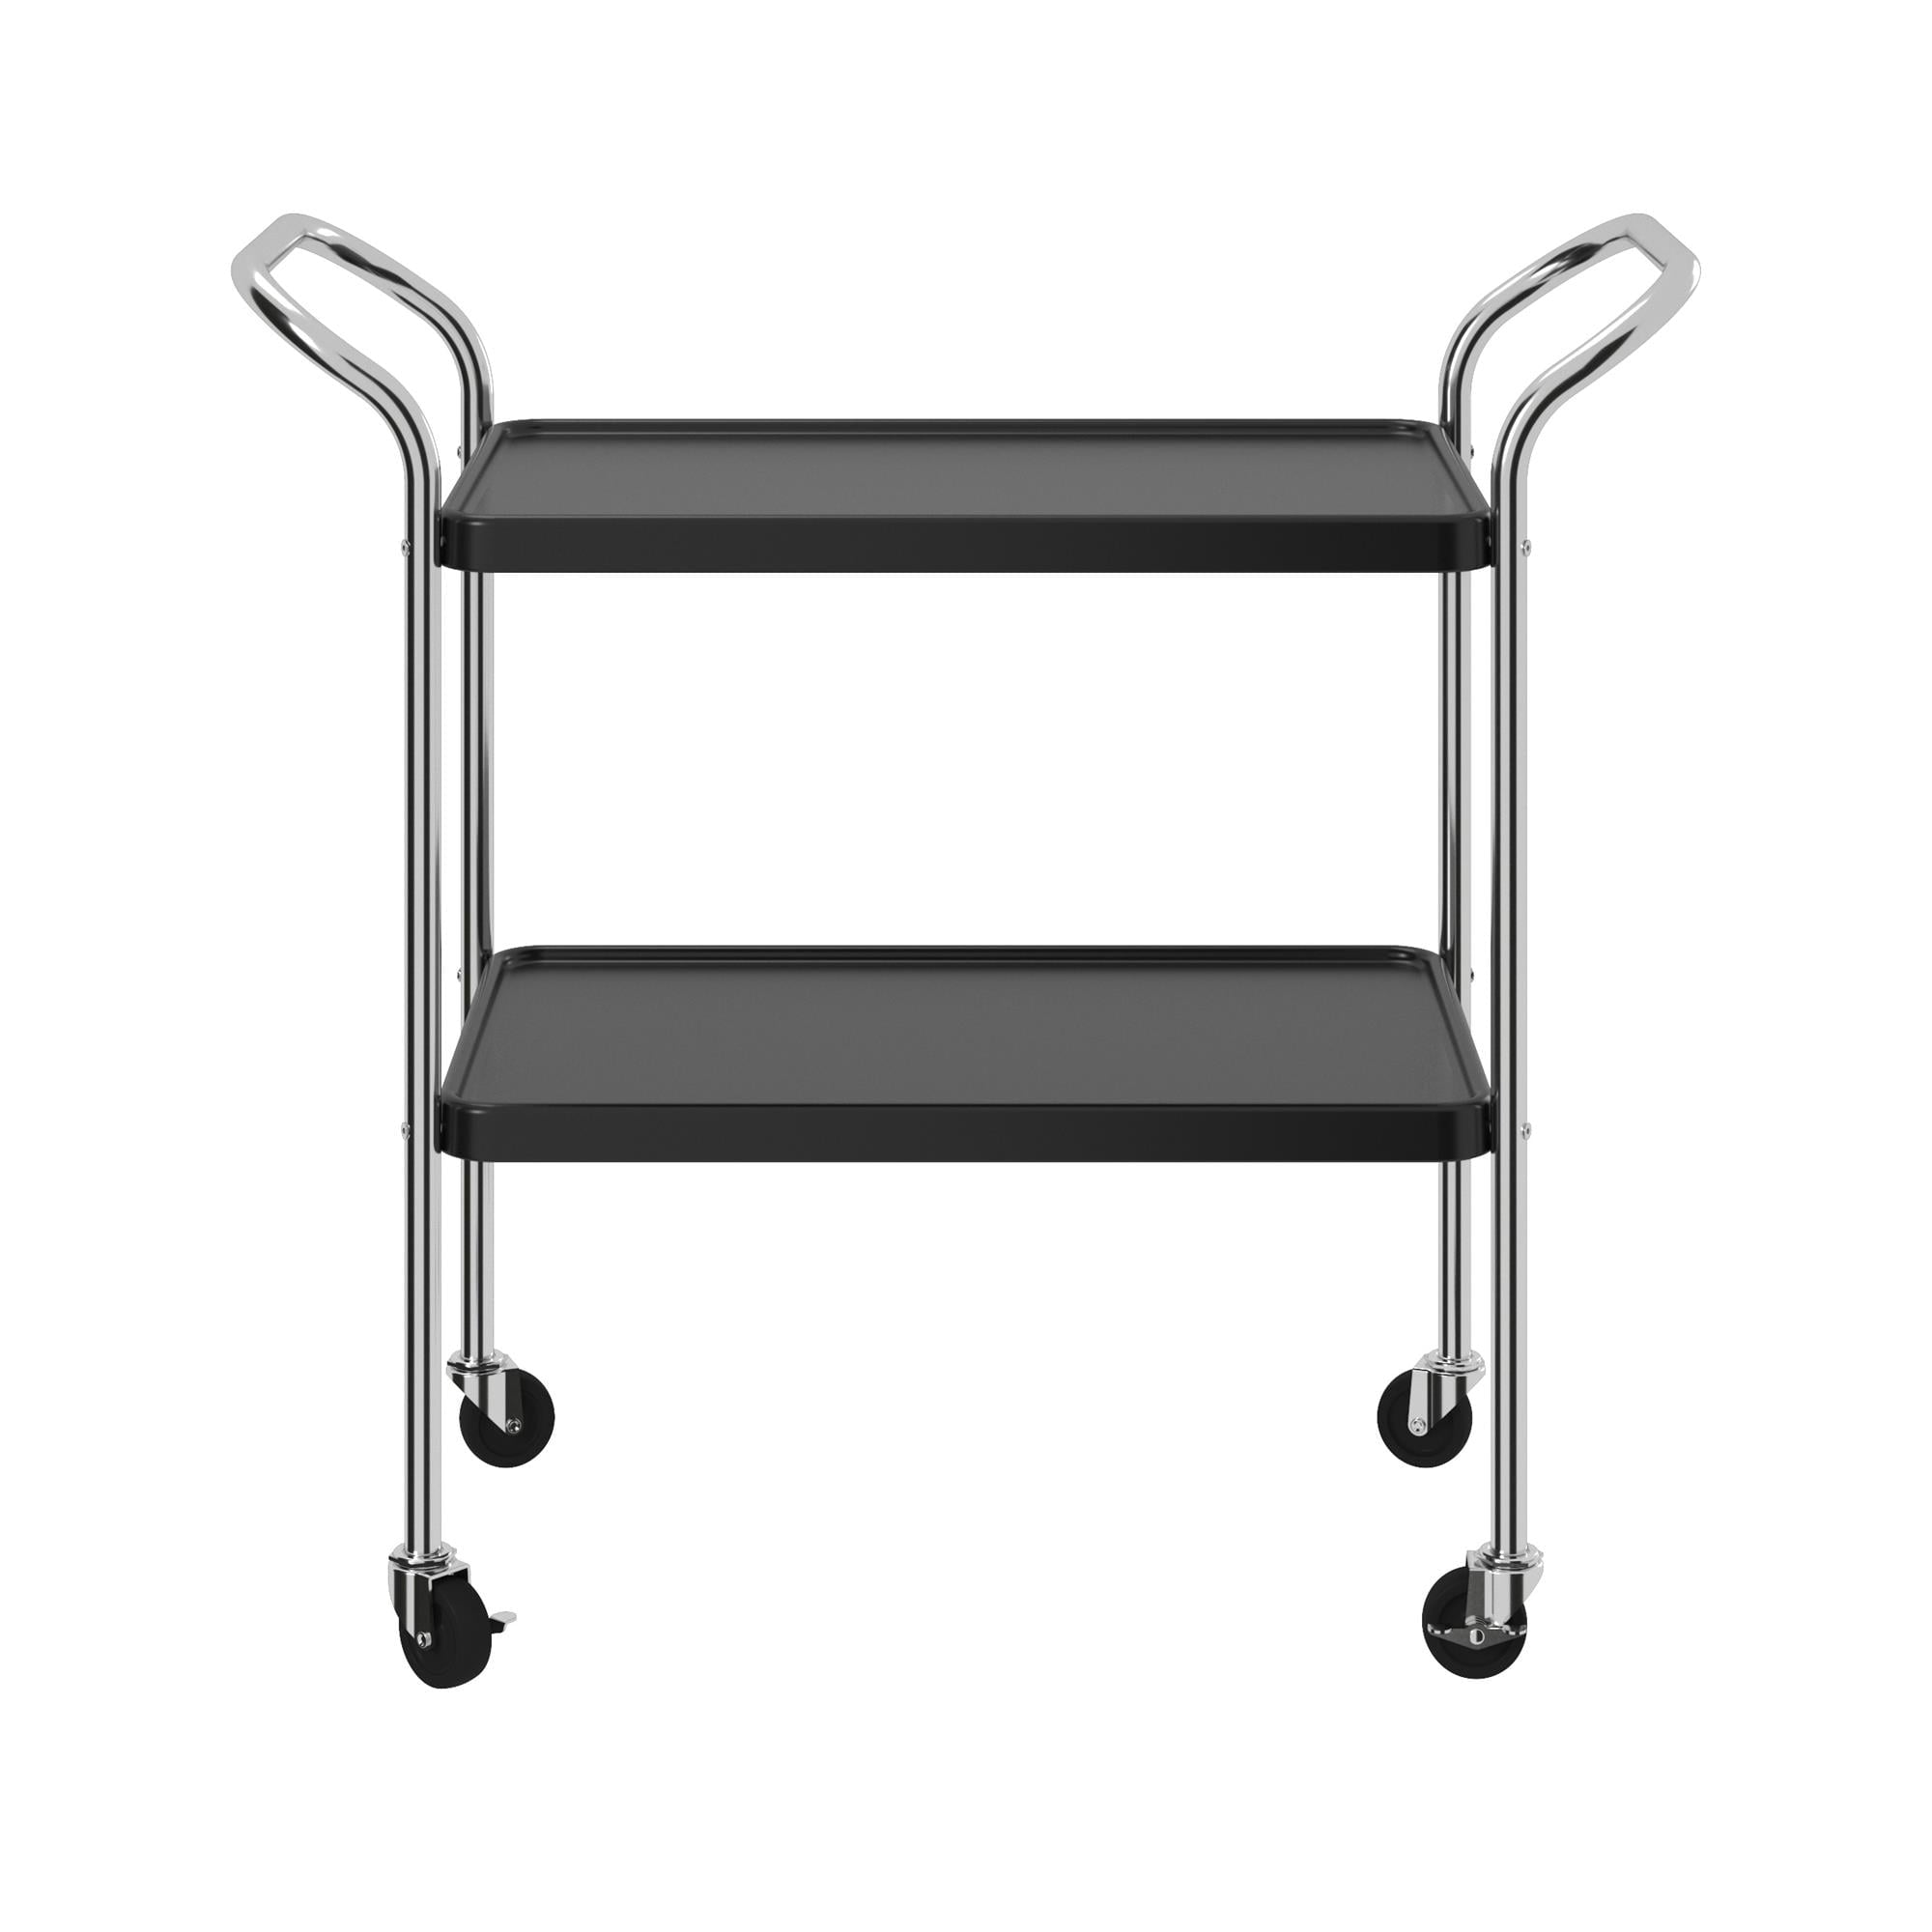 COSCO Stylaire 2 Tier Serving Cart, Black & Silver